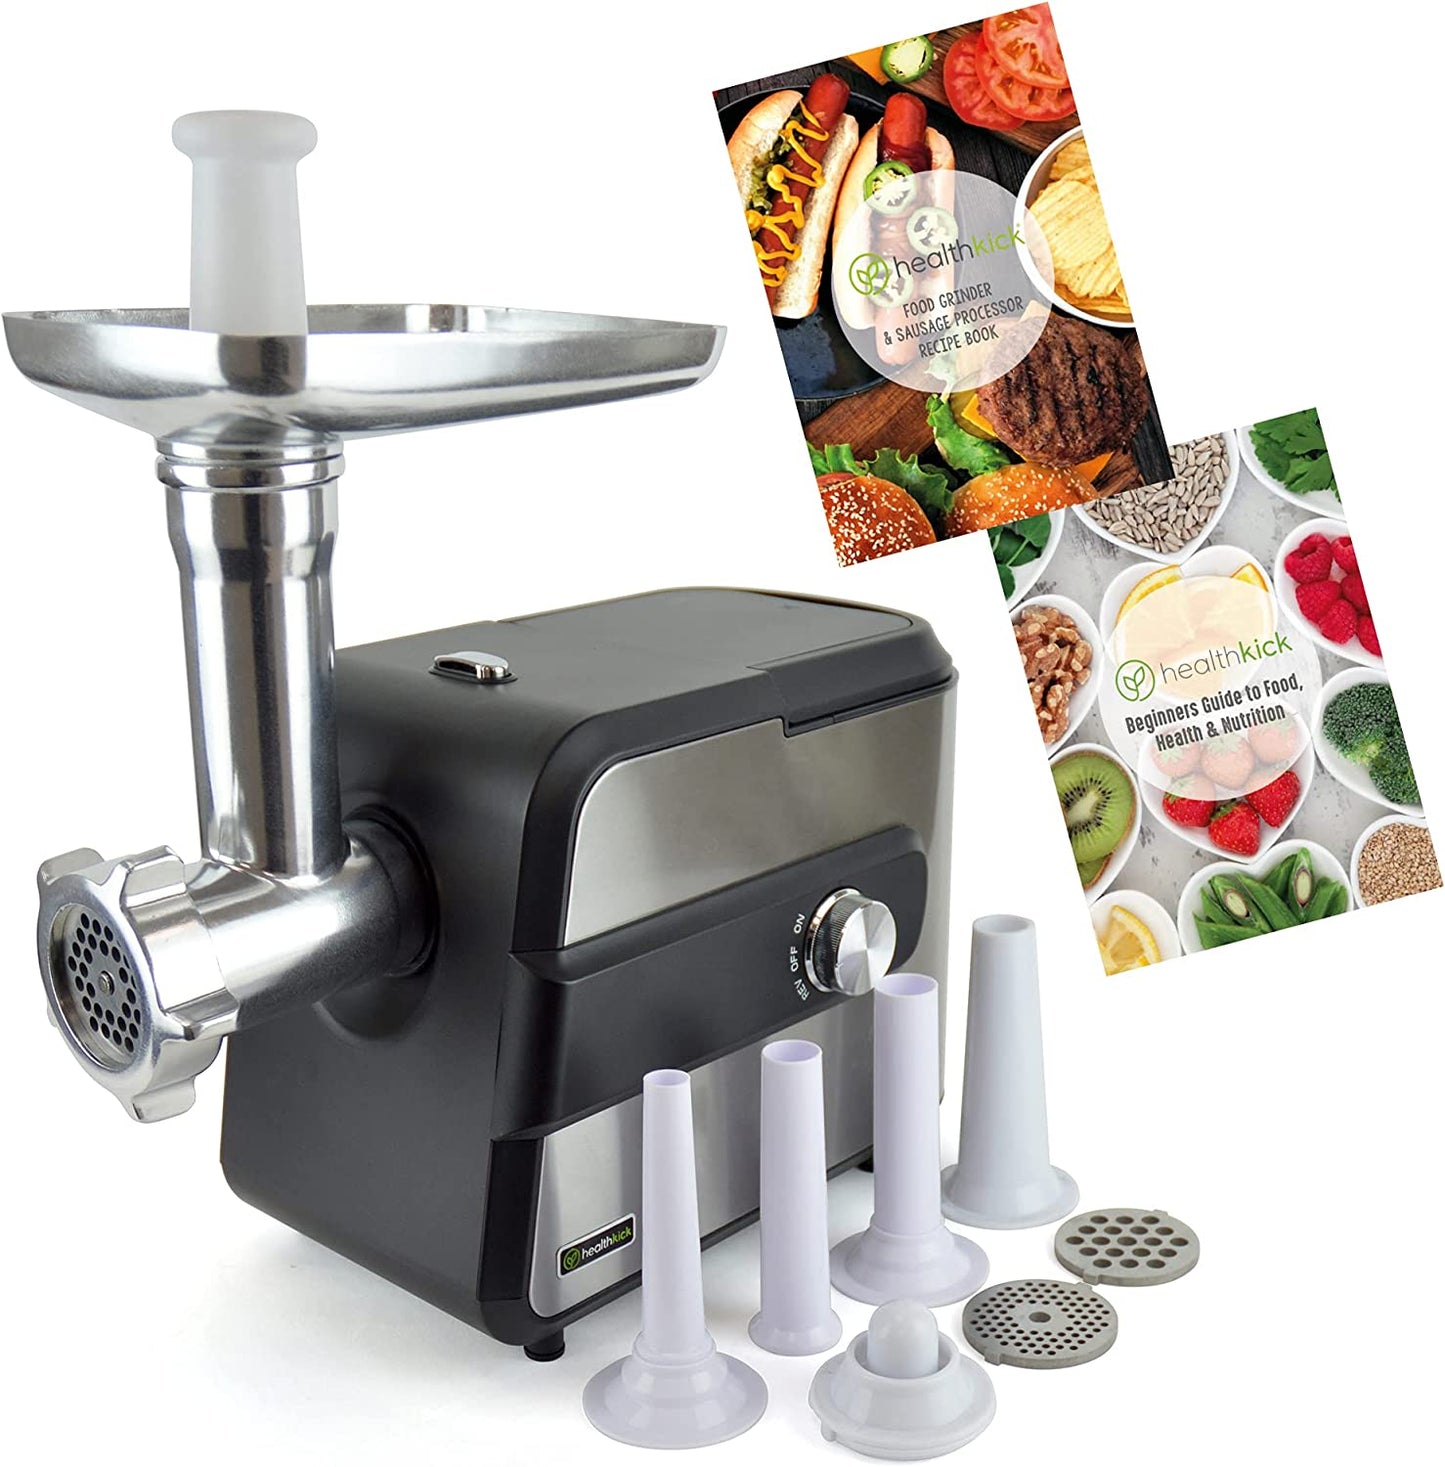 Powerful Healthkick Electric Black and Stainless Steel Food and Meat Grinder (K3321)